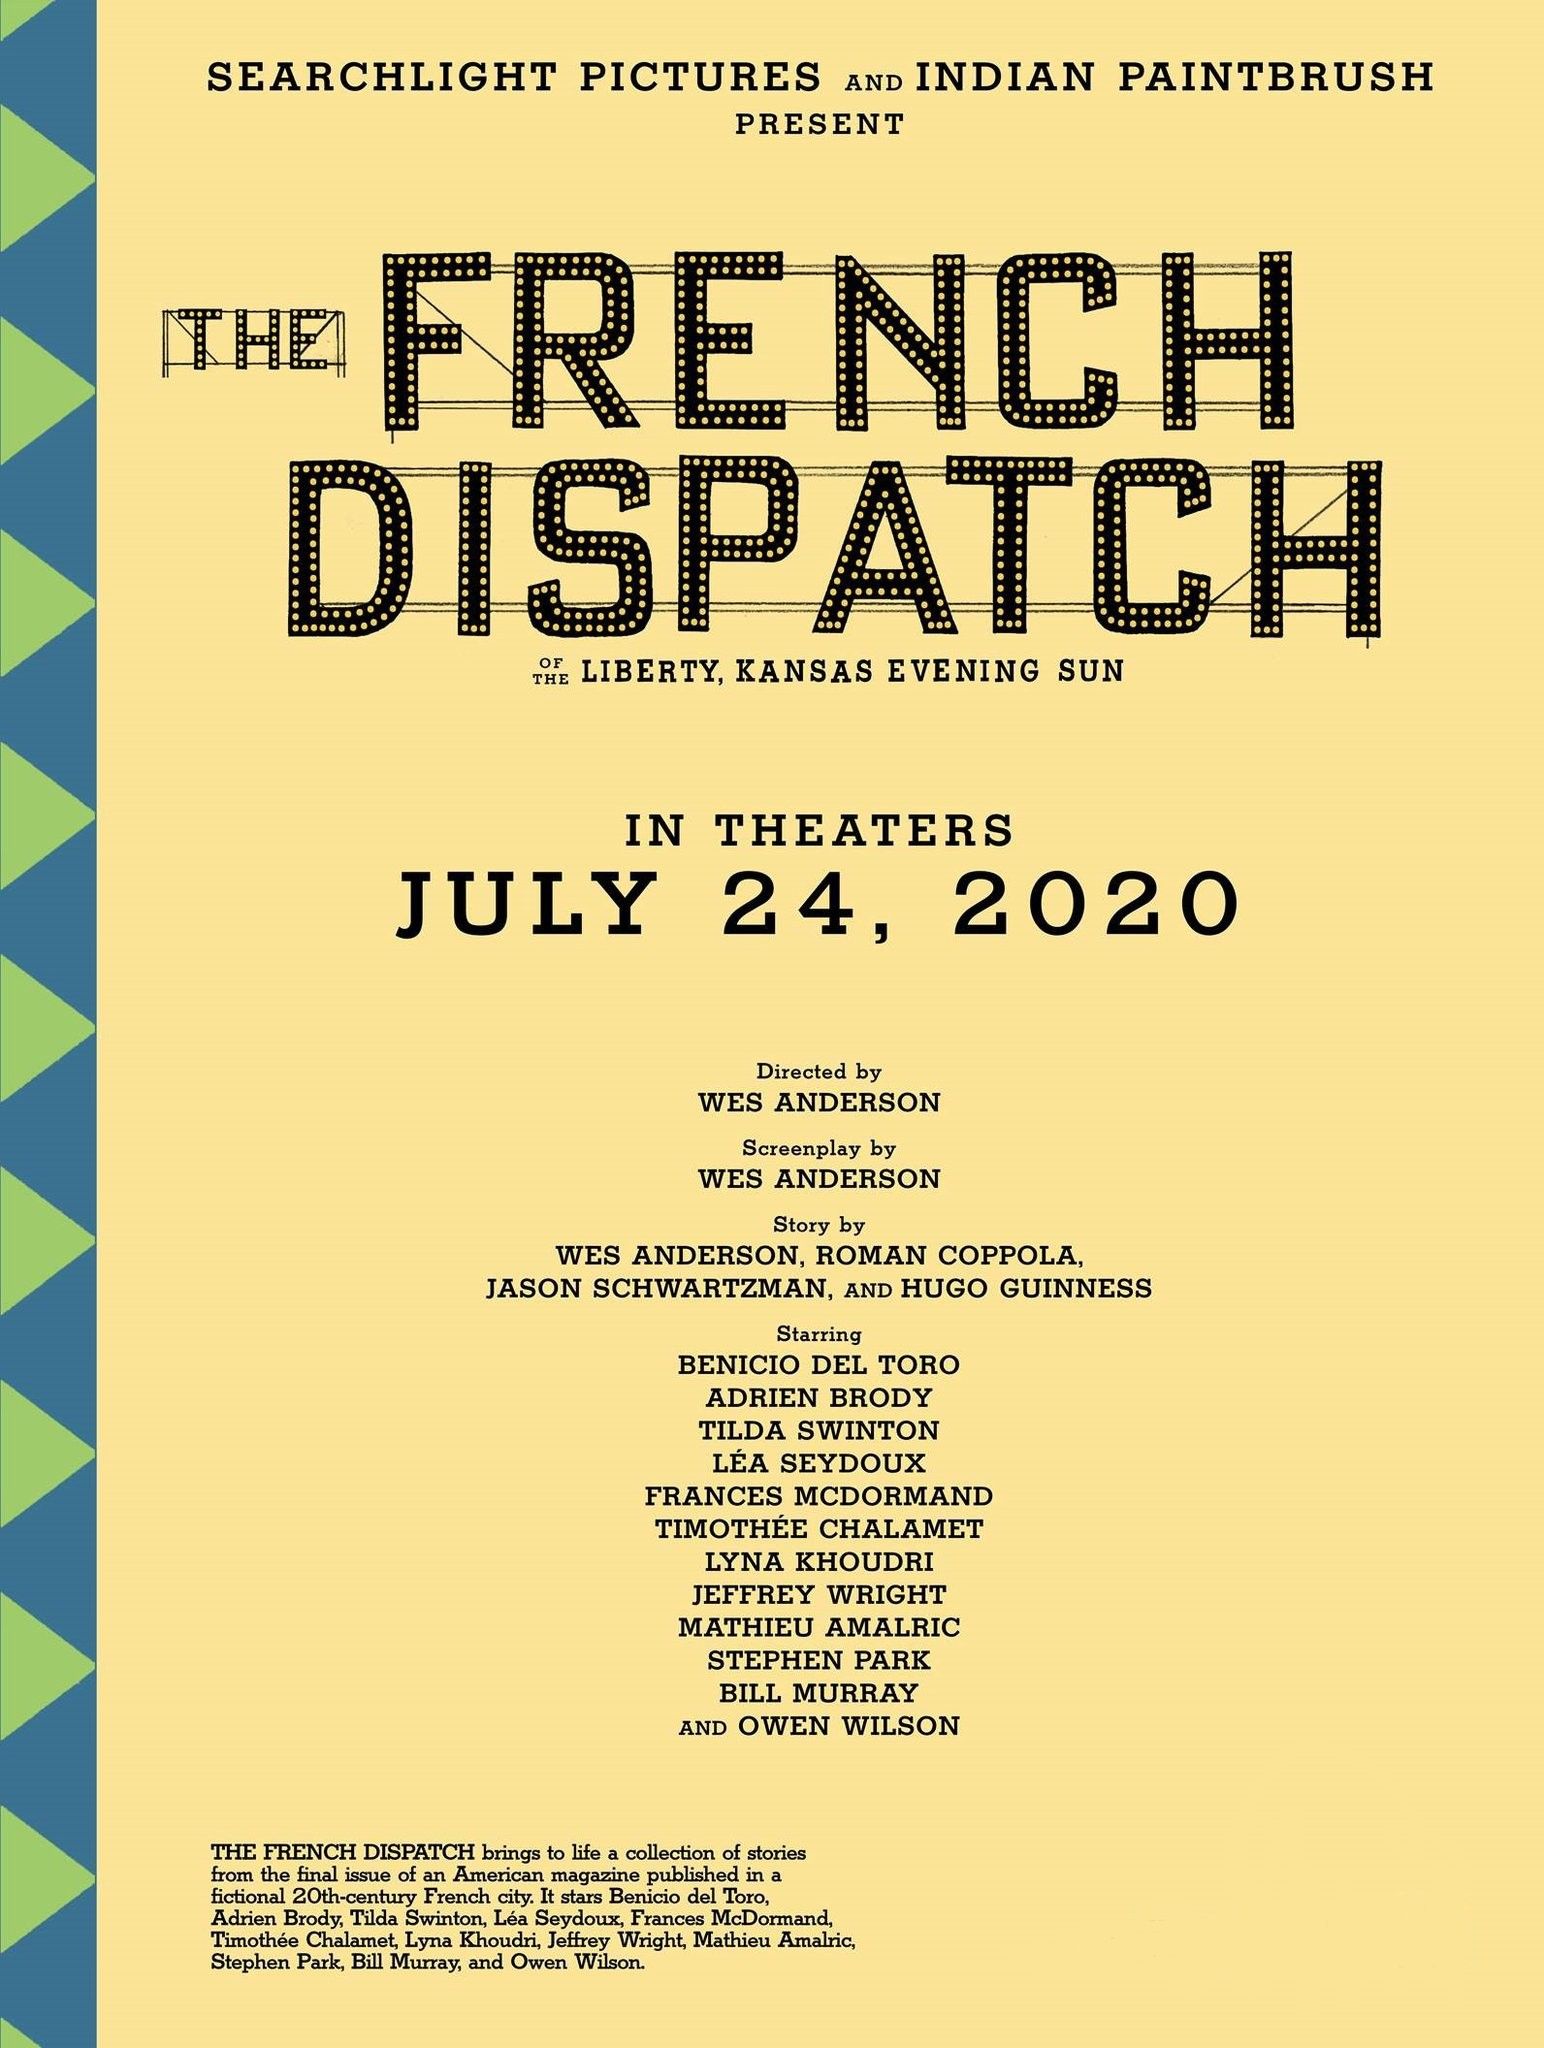 The French Dispatch Release Date Poster